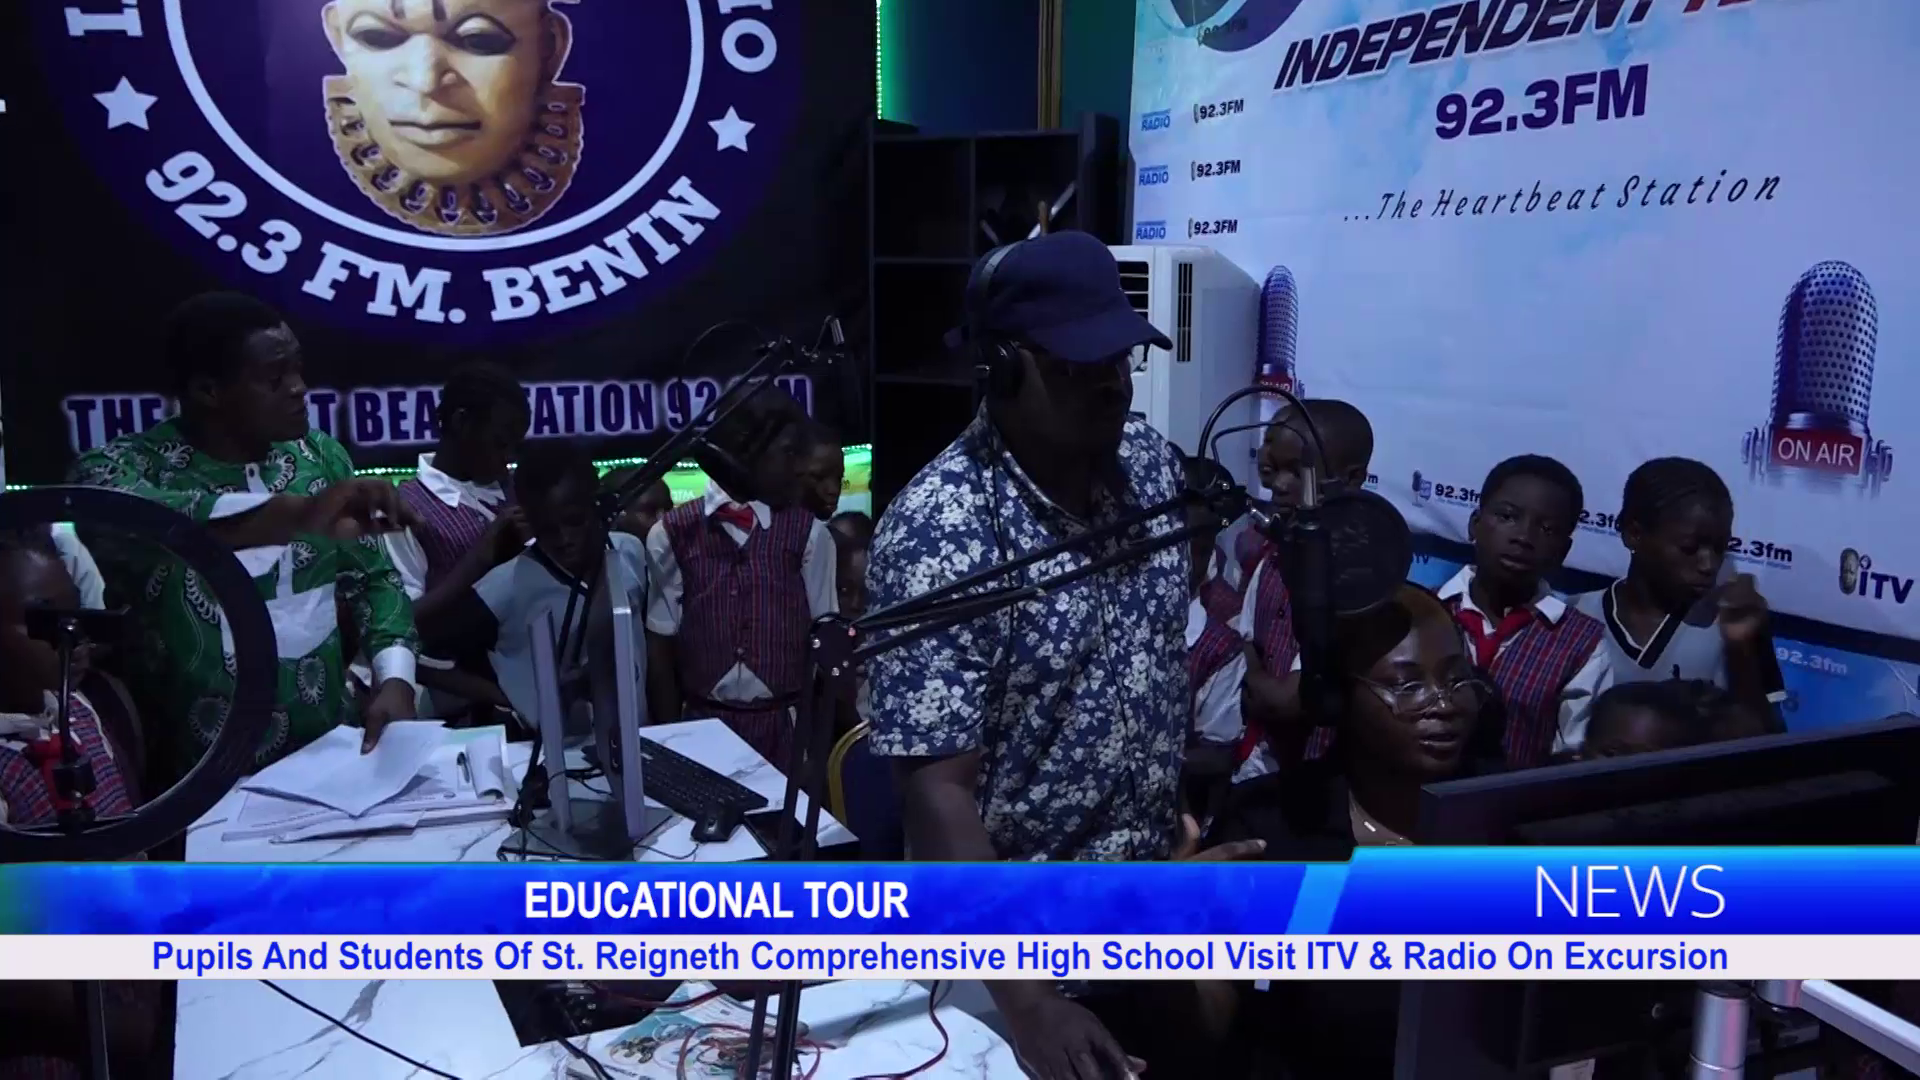 Pupils And Students Of St. Reigneth Comprehensive High School Visit ITV & Radio On Excursion